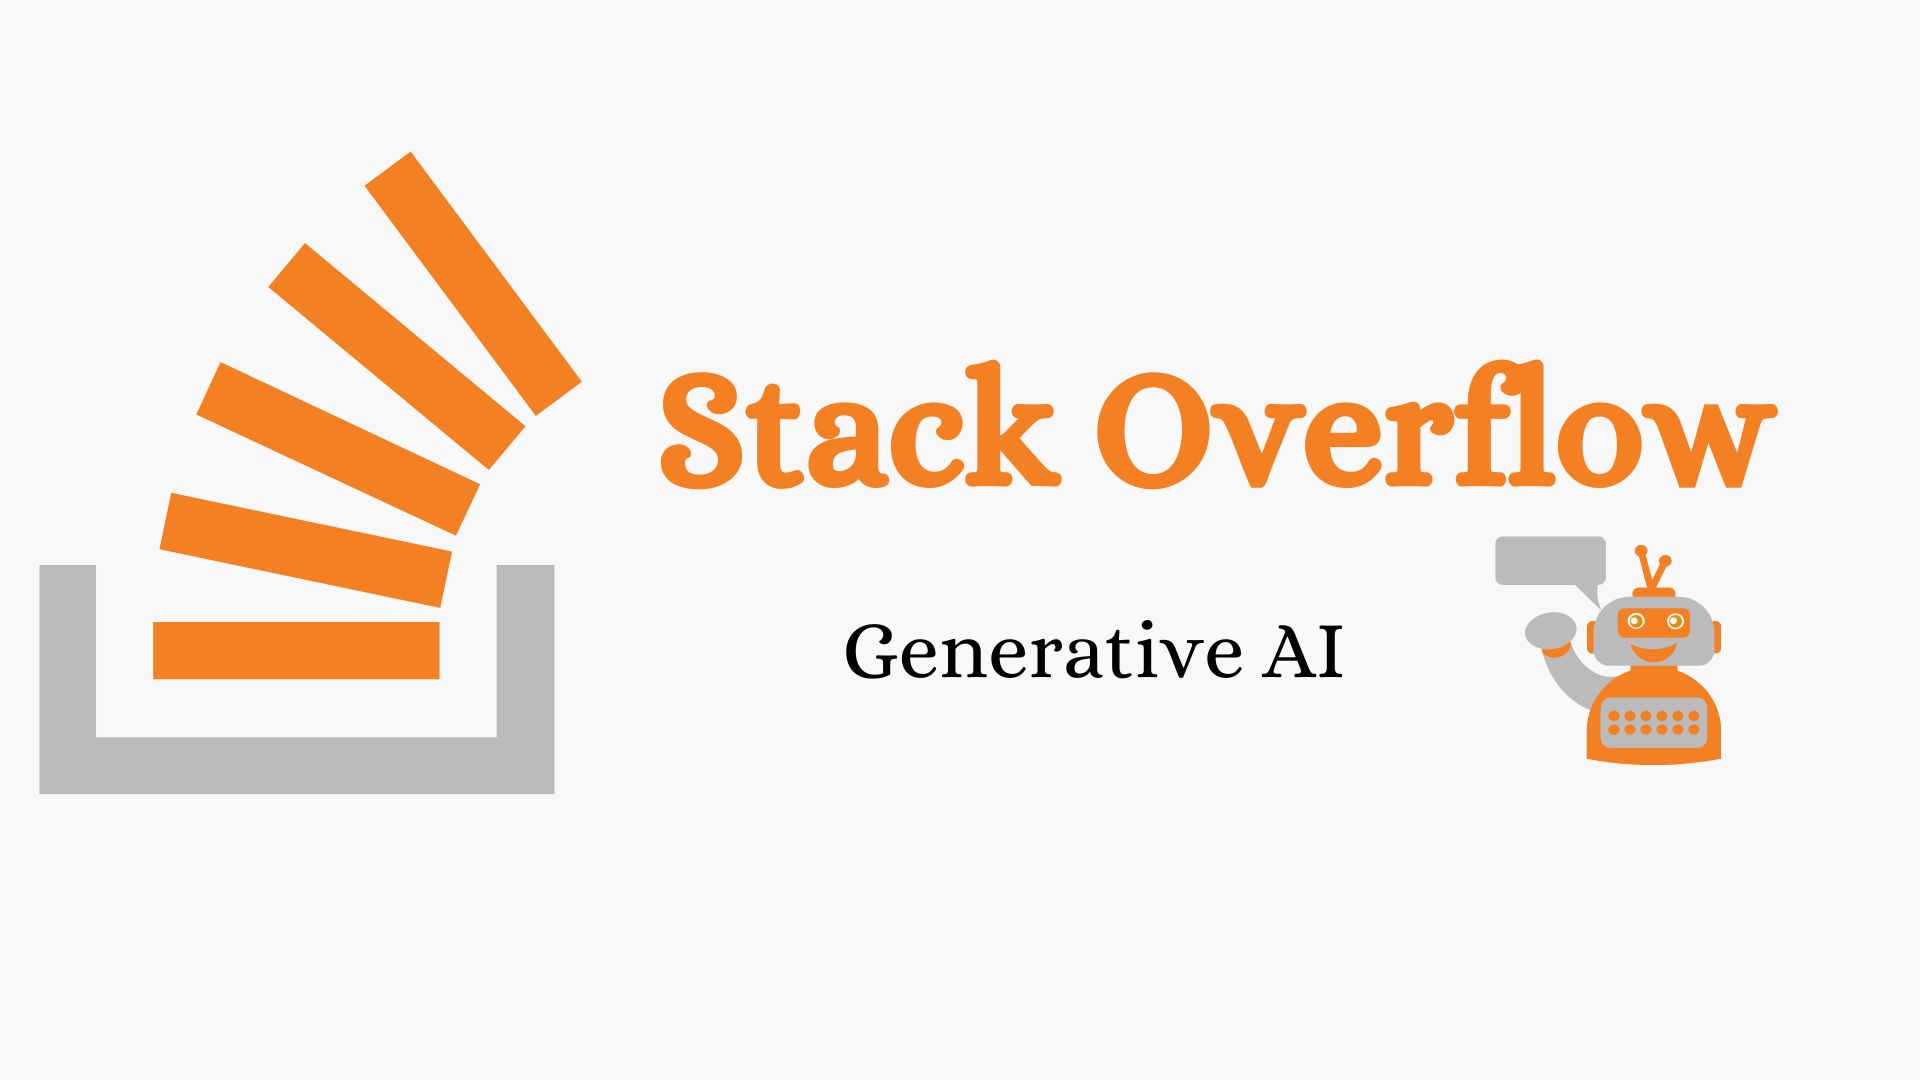 Stack Overflow generative AI